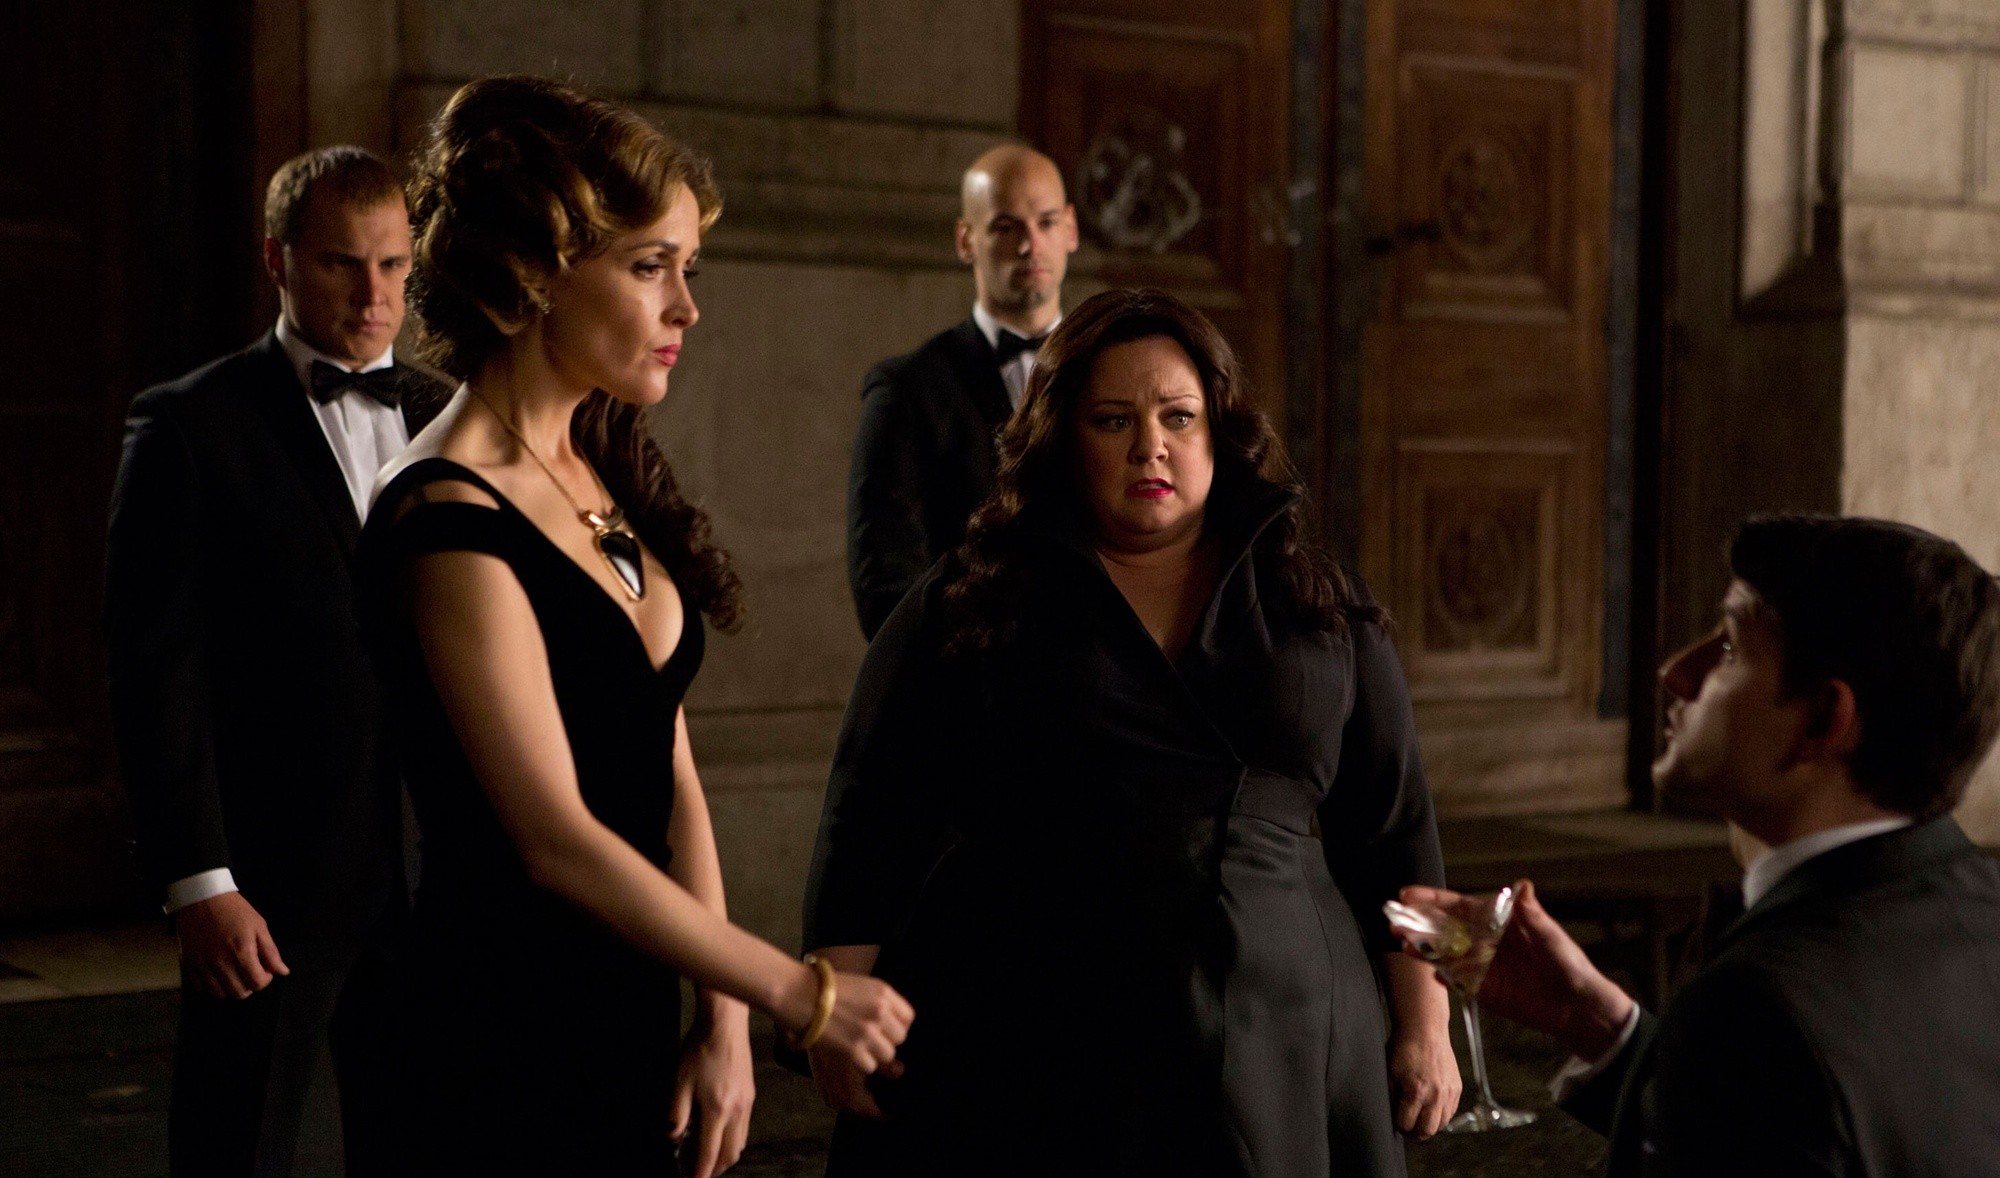 Rose Byrne and Melissa McCarthy (stars as Susan Cooper) in 20th Century Fox's Spy (2015)